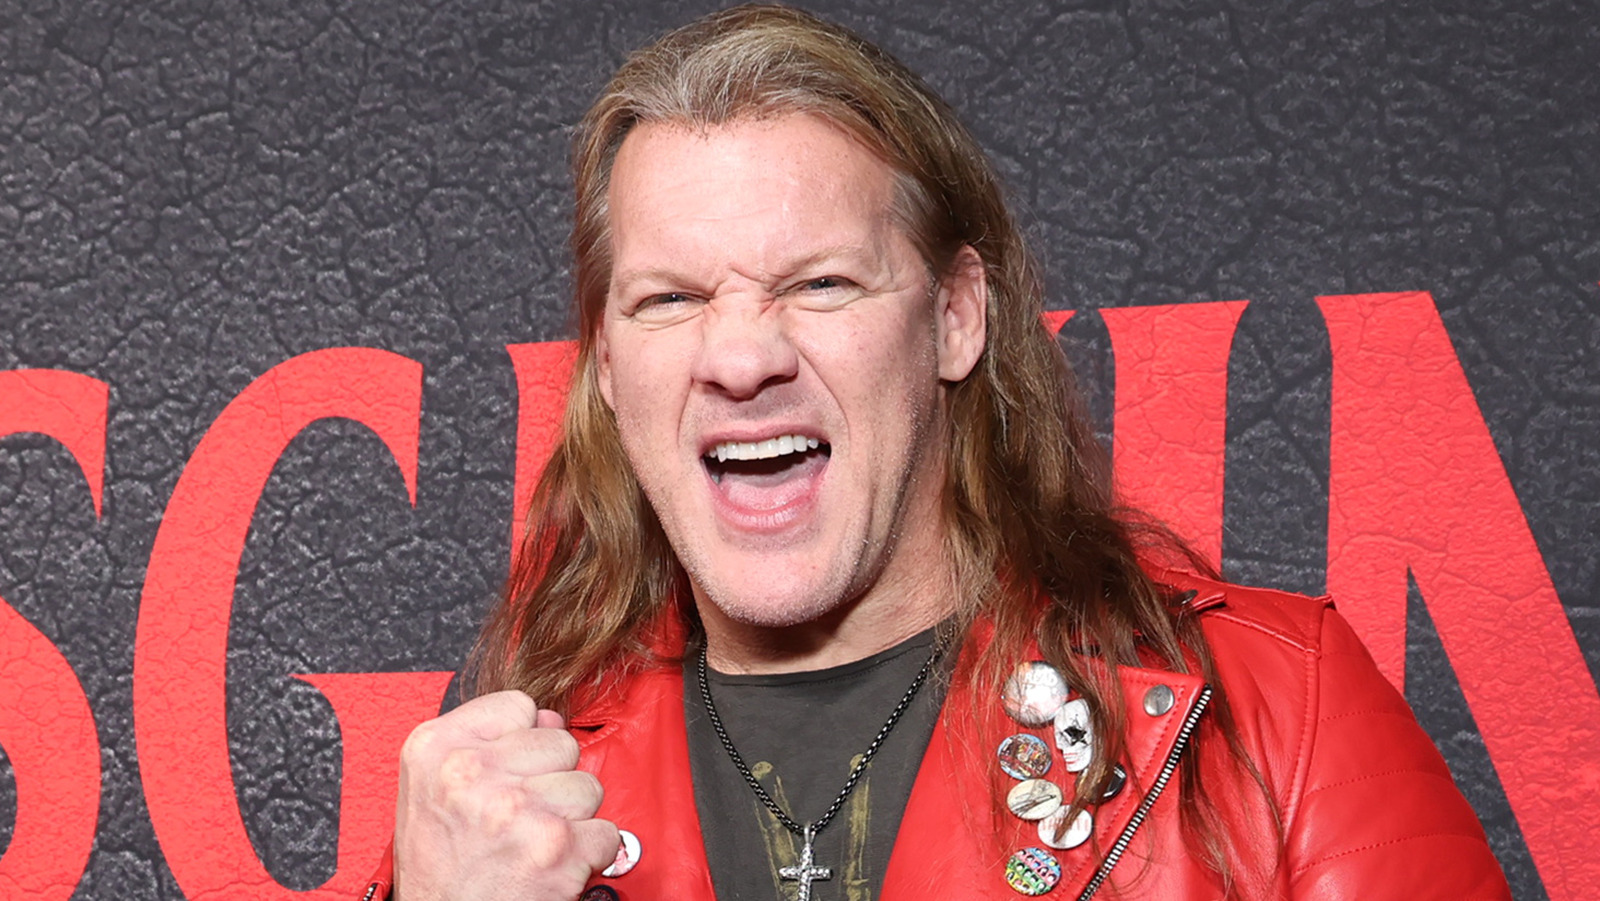 Chris Jericho Contemplates The Idea Of Running An AEW PPV From The Jericho Cruise